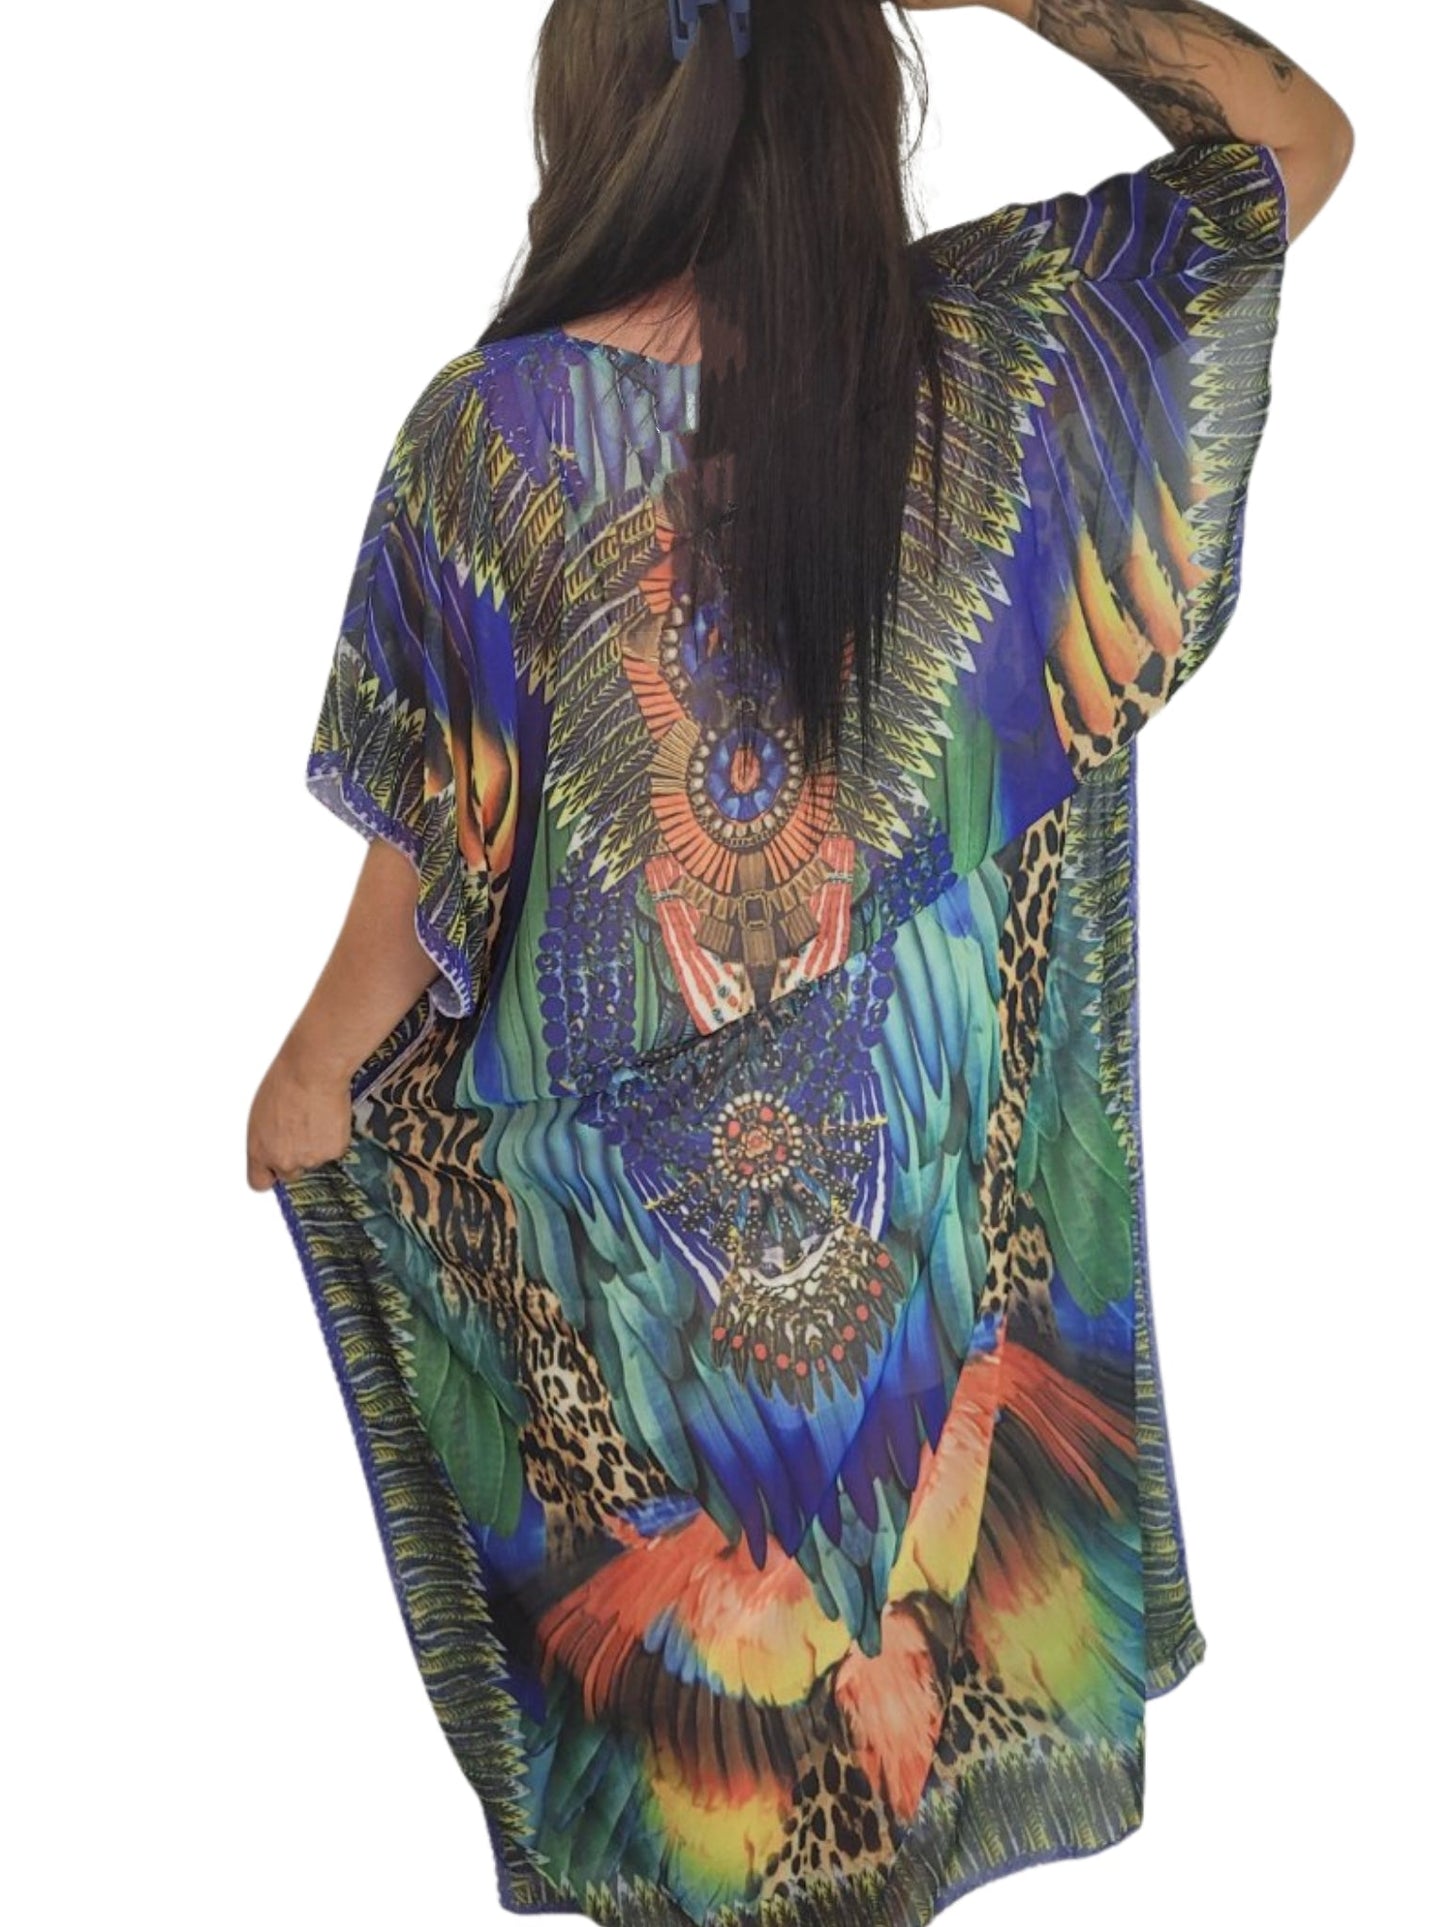 JAZZY Bejeweled Maxi Kaftan Dresses Colors - Sunset Blue Yellow, Turquoise Luxury, Country style, Grey Blue, Parrot Kaftan Dress Aambers Goodies xx 